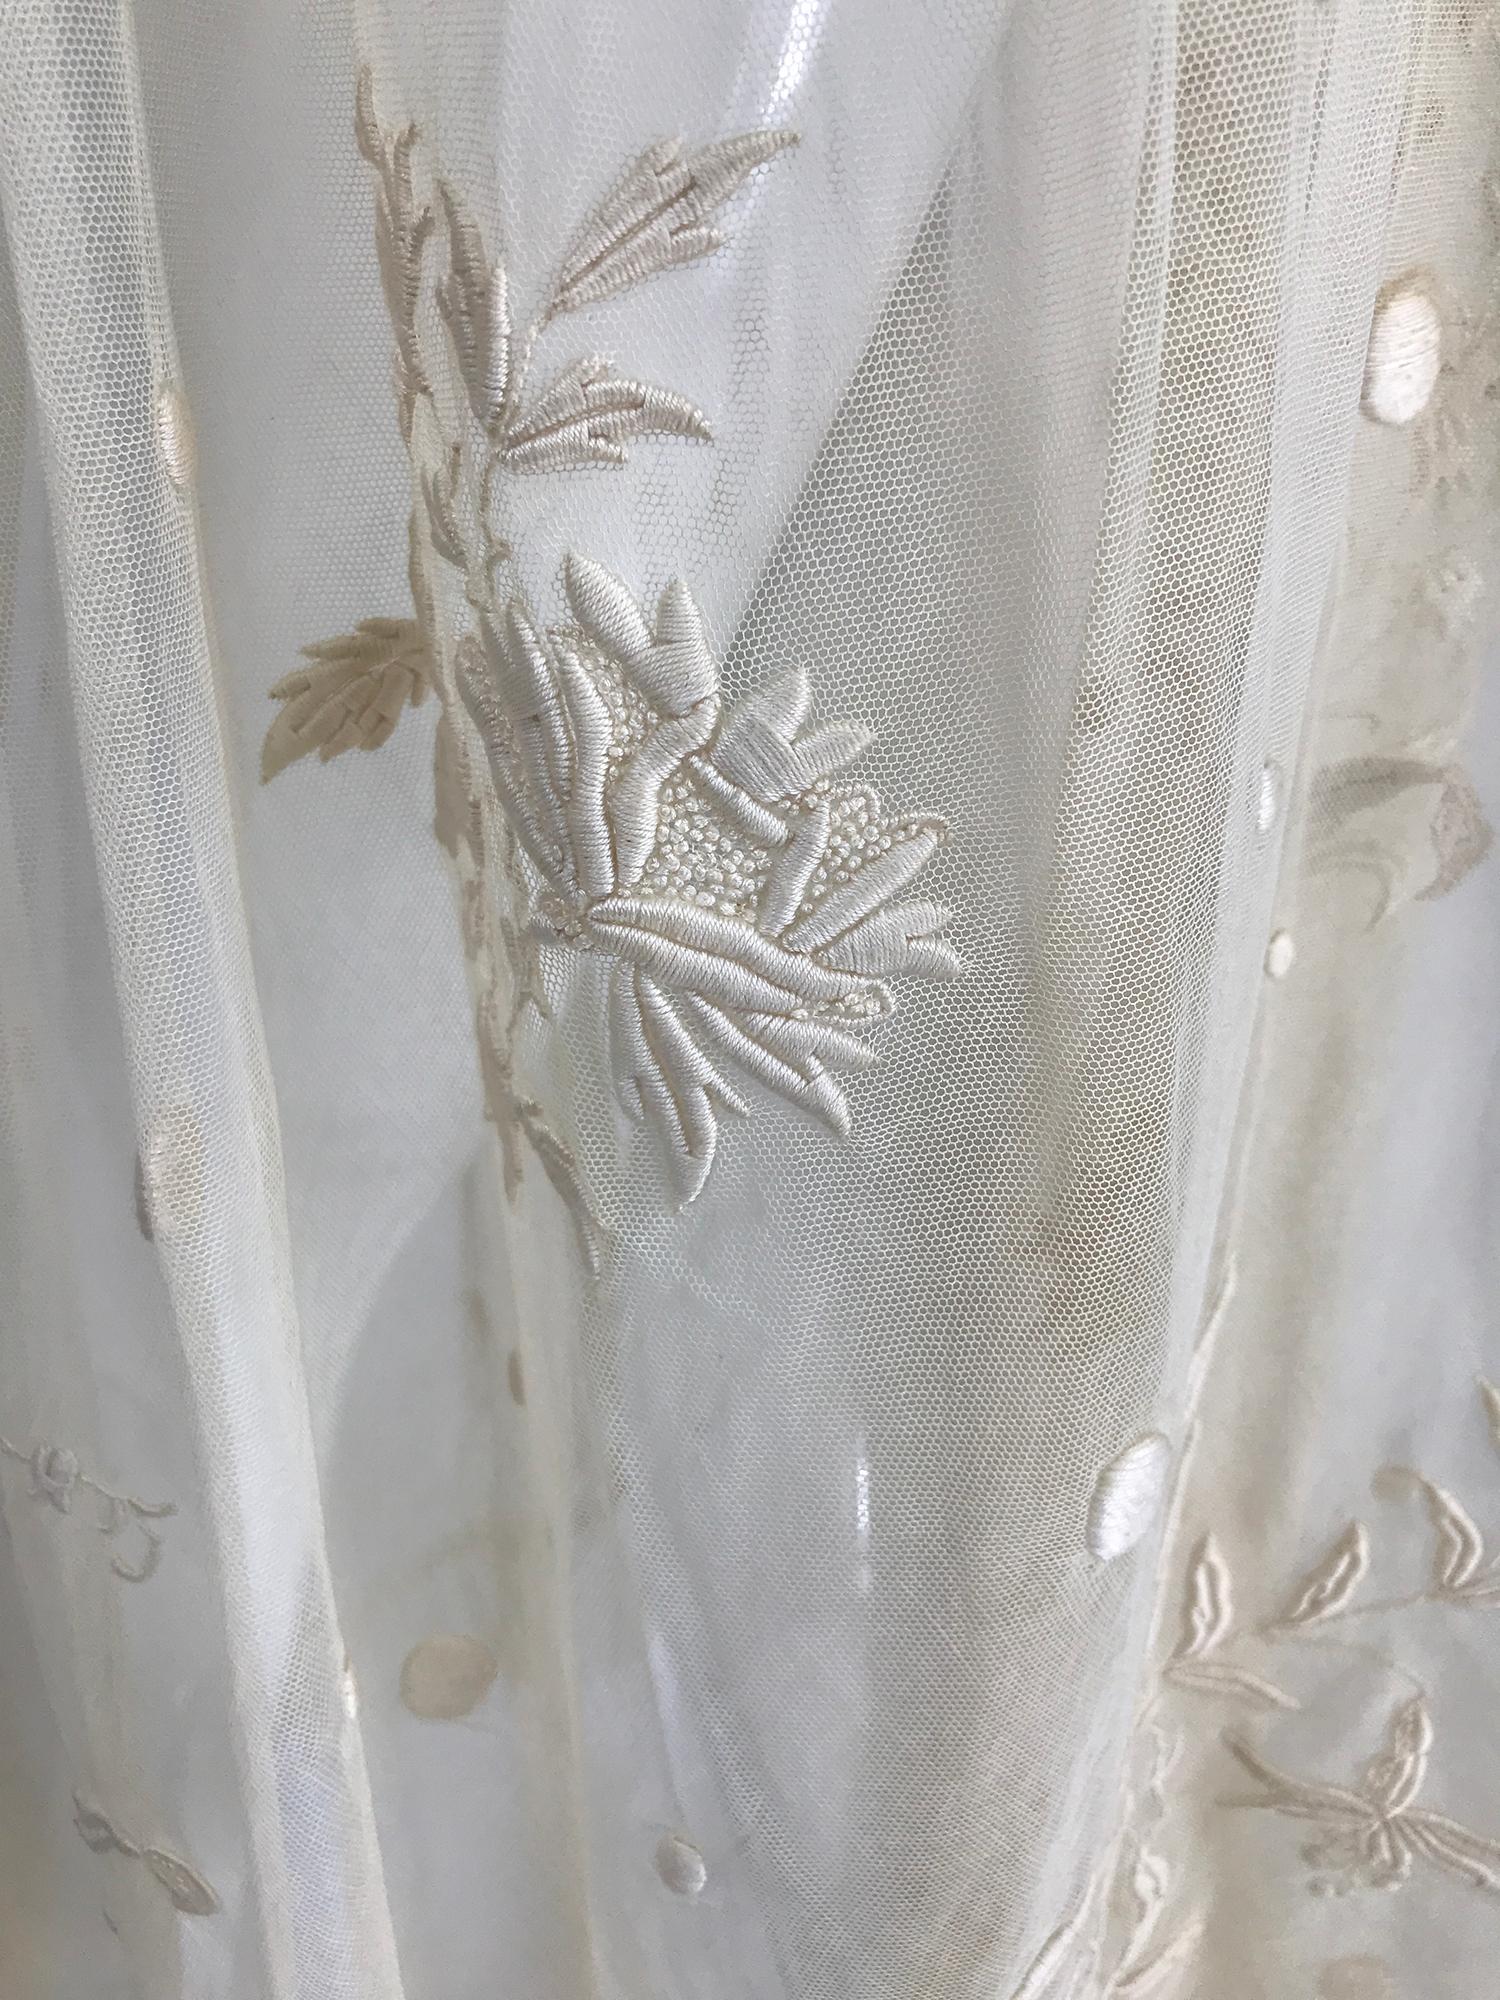 Edwardian Ecru Satin Stitch Embroidered Tulle Skirt 1900s For Sale 2